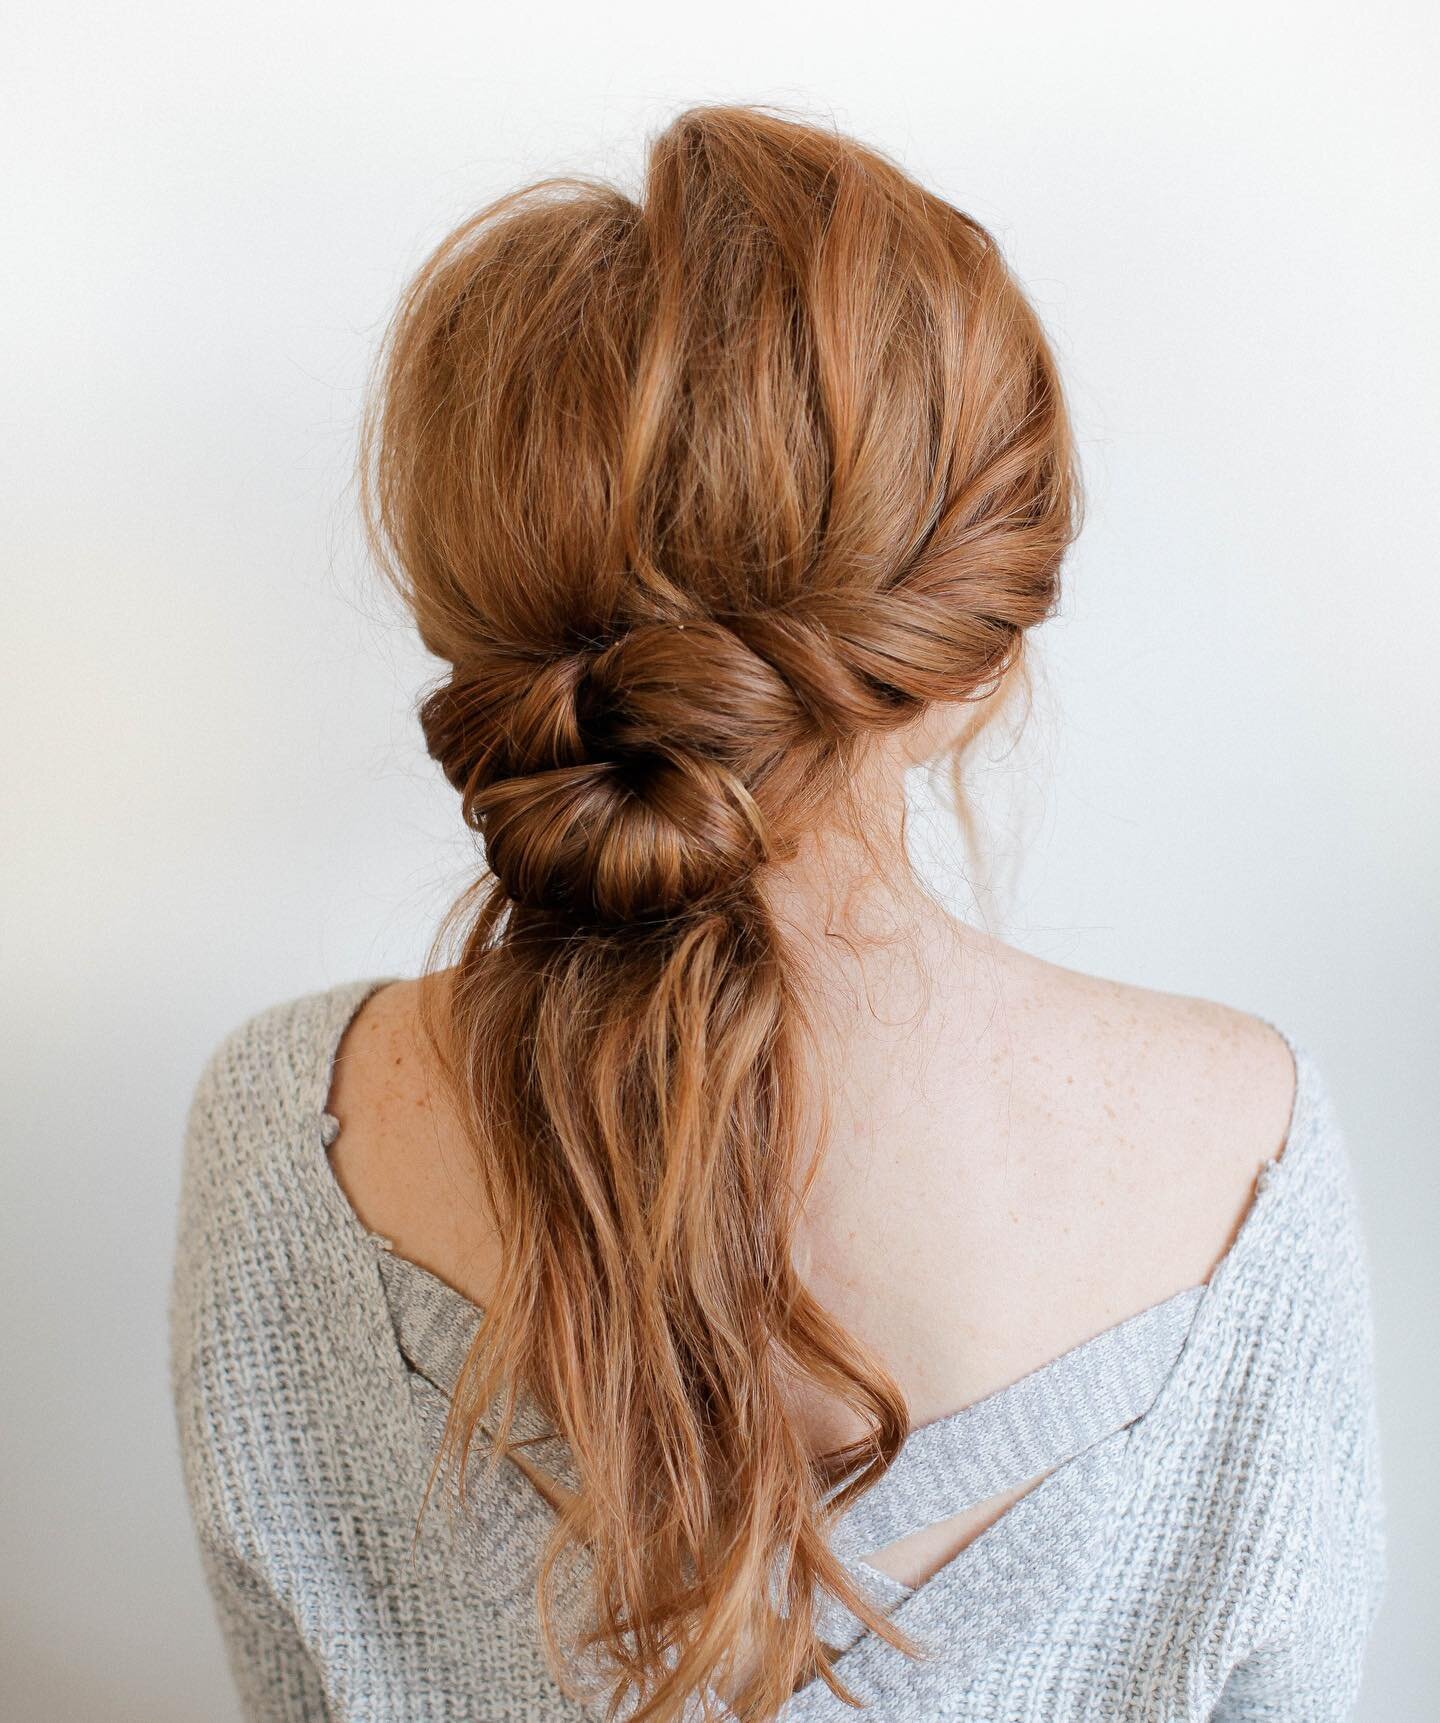 A tiny tutorial for your Friday! 
Start with texture hair- we sprayed @oribe texture spray and loosely curled with teasing in the crown. 
1. Twist each side to form a half up half down 
2. Split the bottom hair in half and tie in knot 
3. Pin it unde